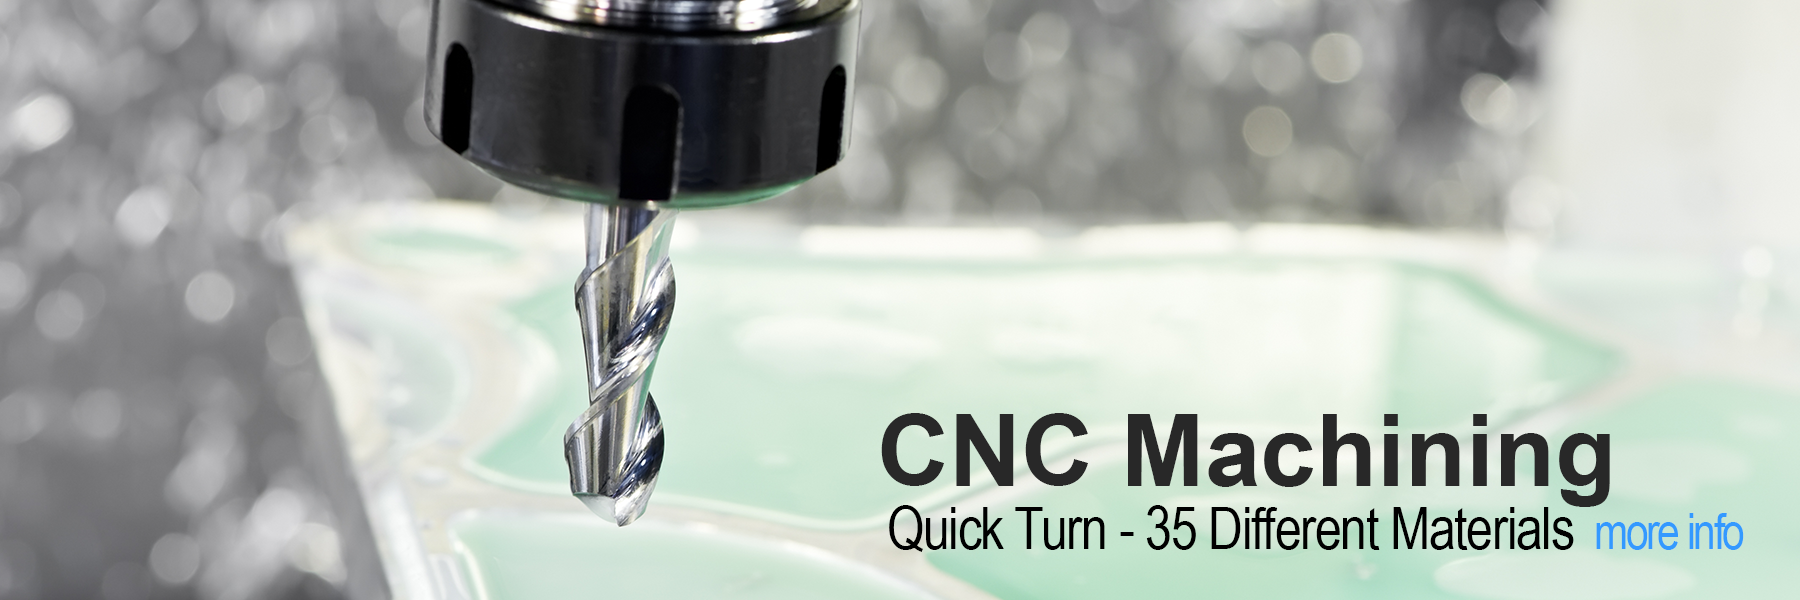 CNC Machining - Quick Turn - Large Selection of Materials